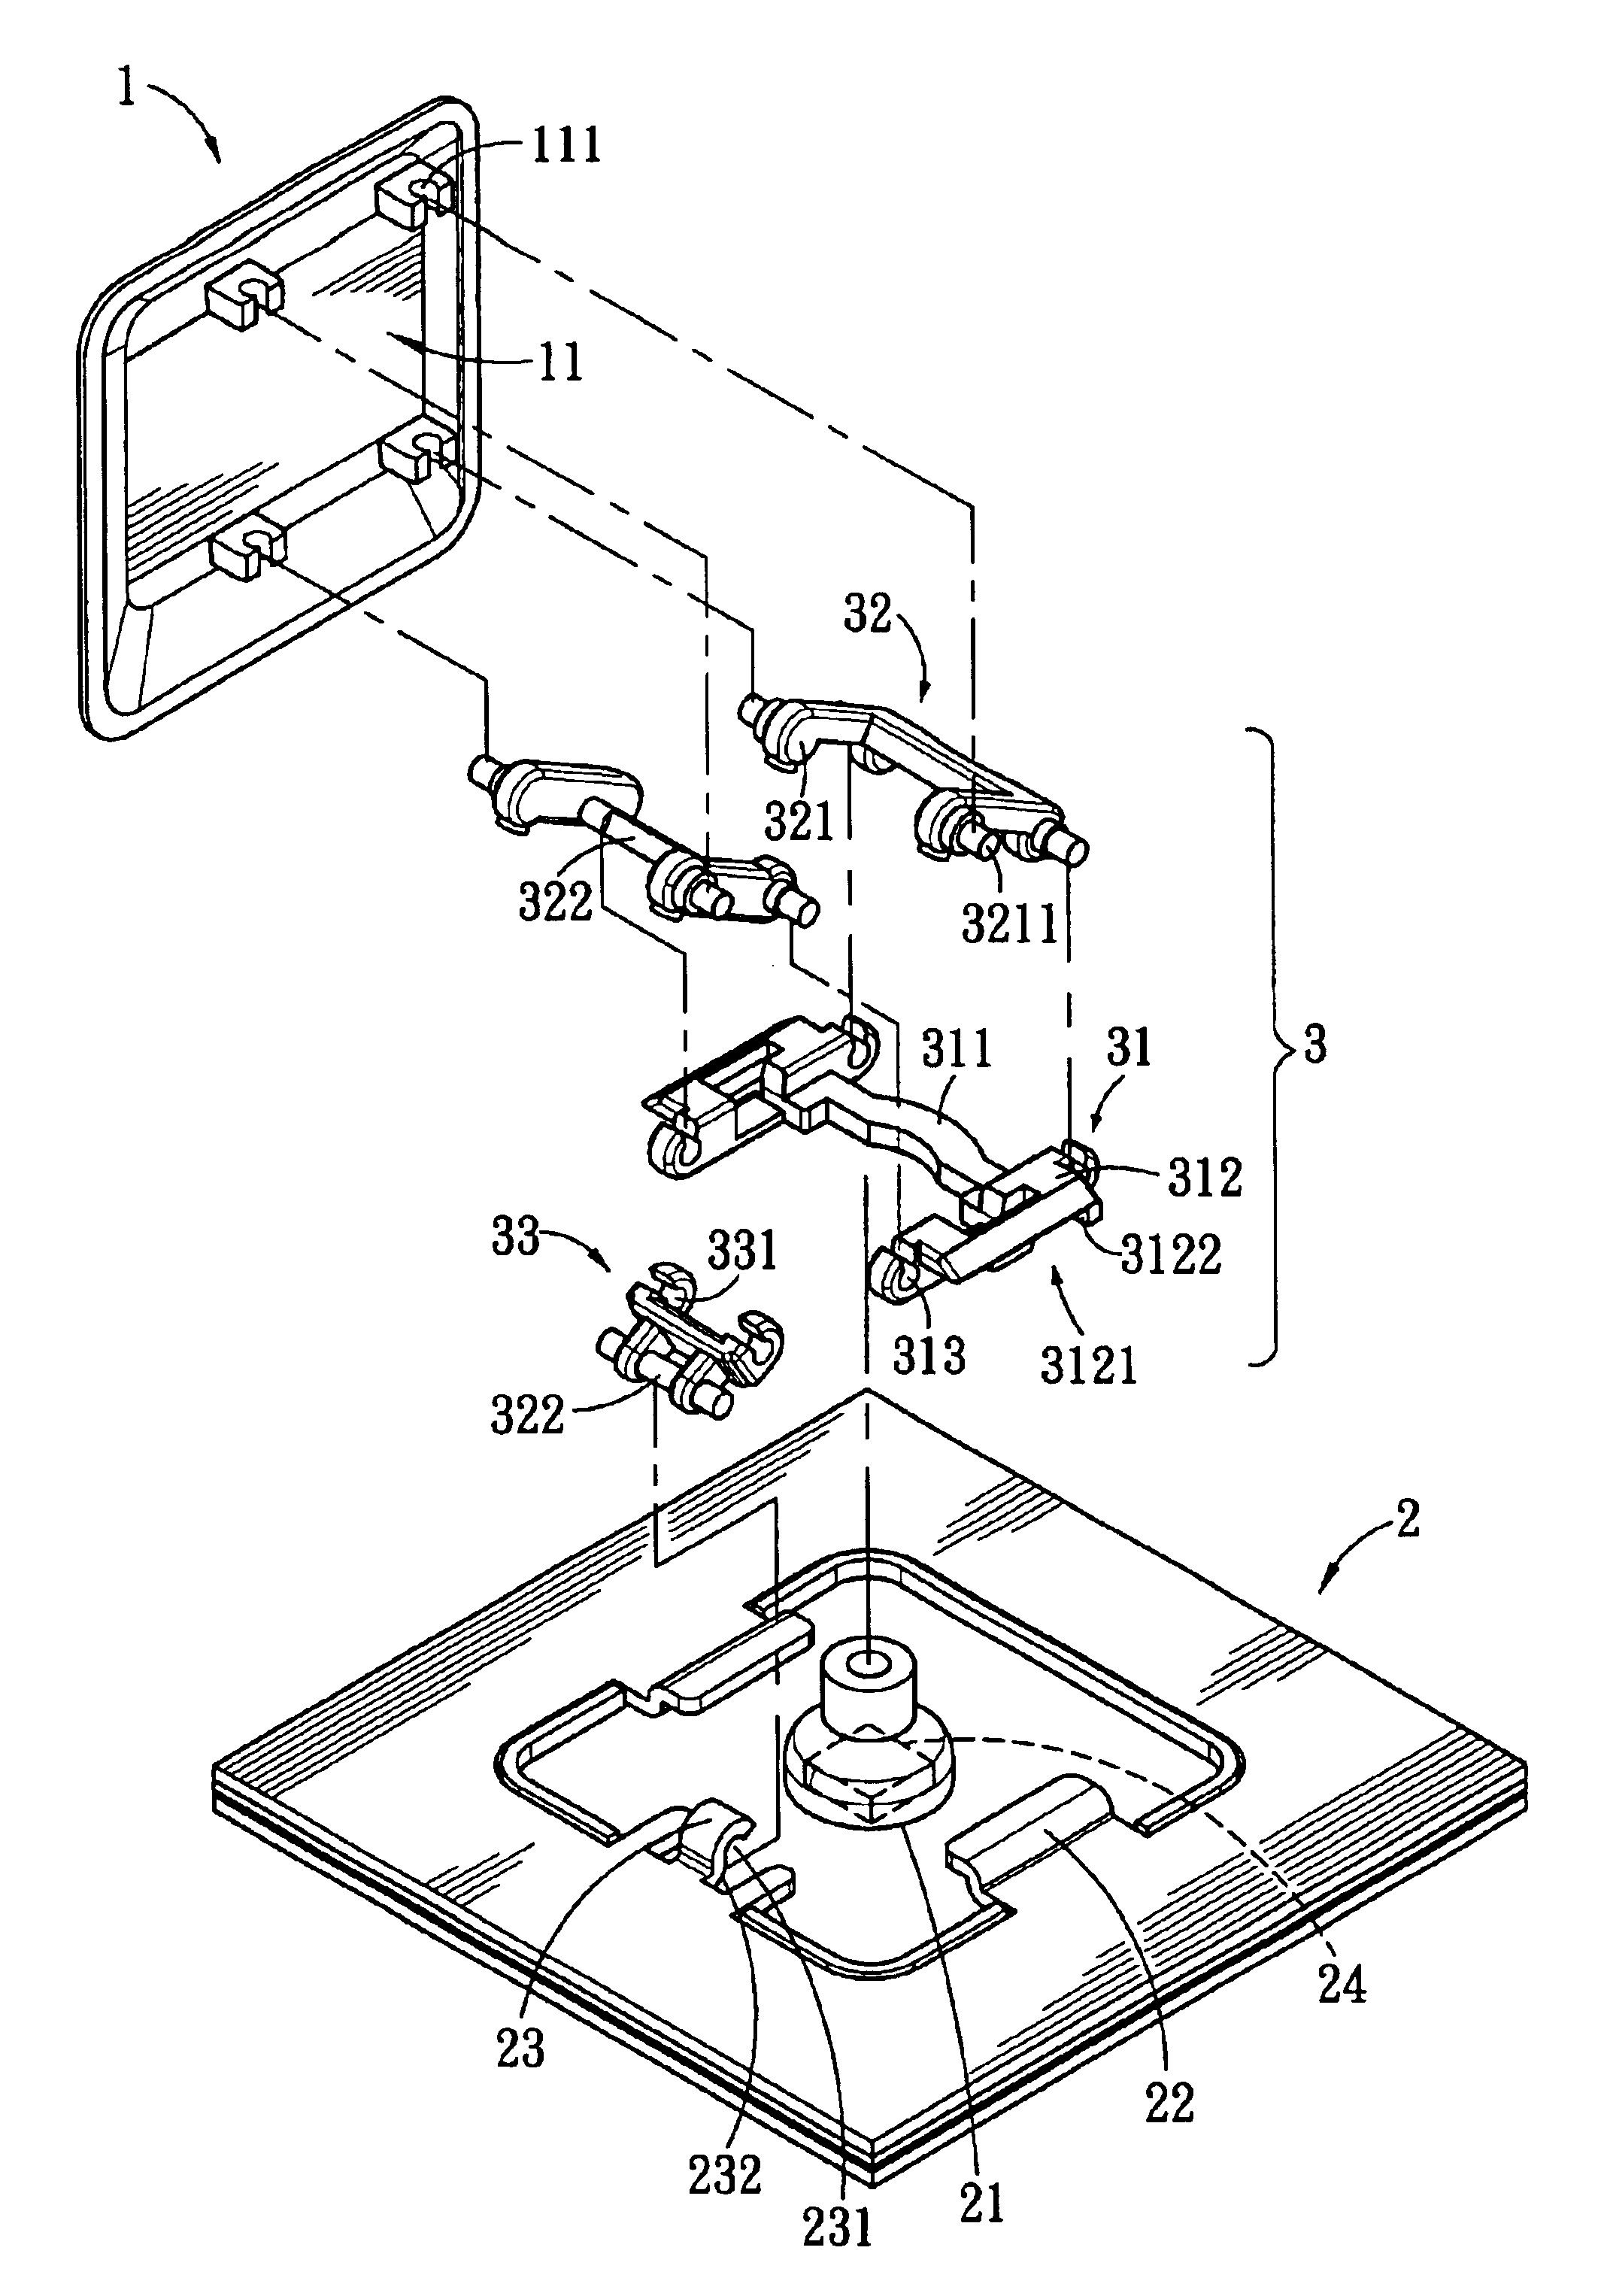 Structure of button for electronic product